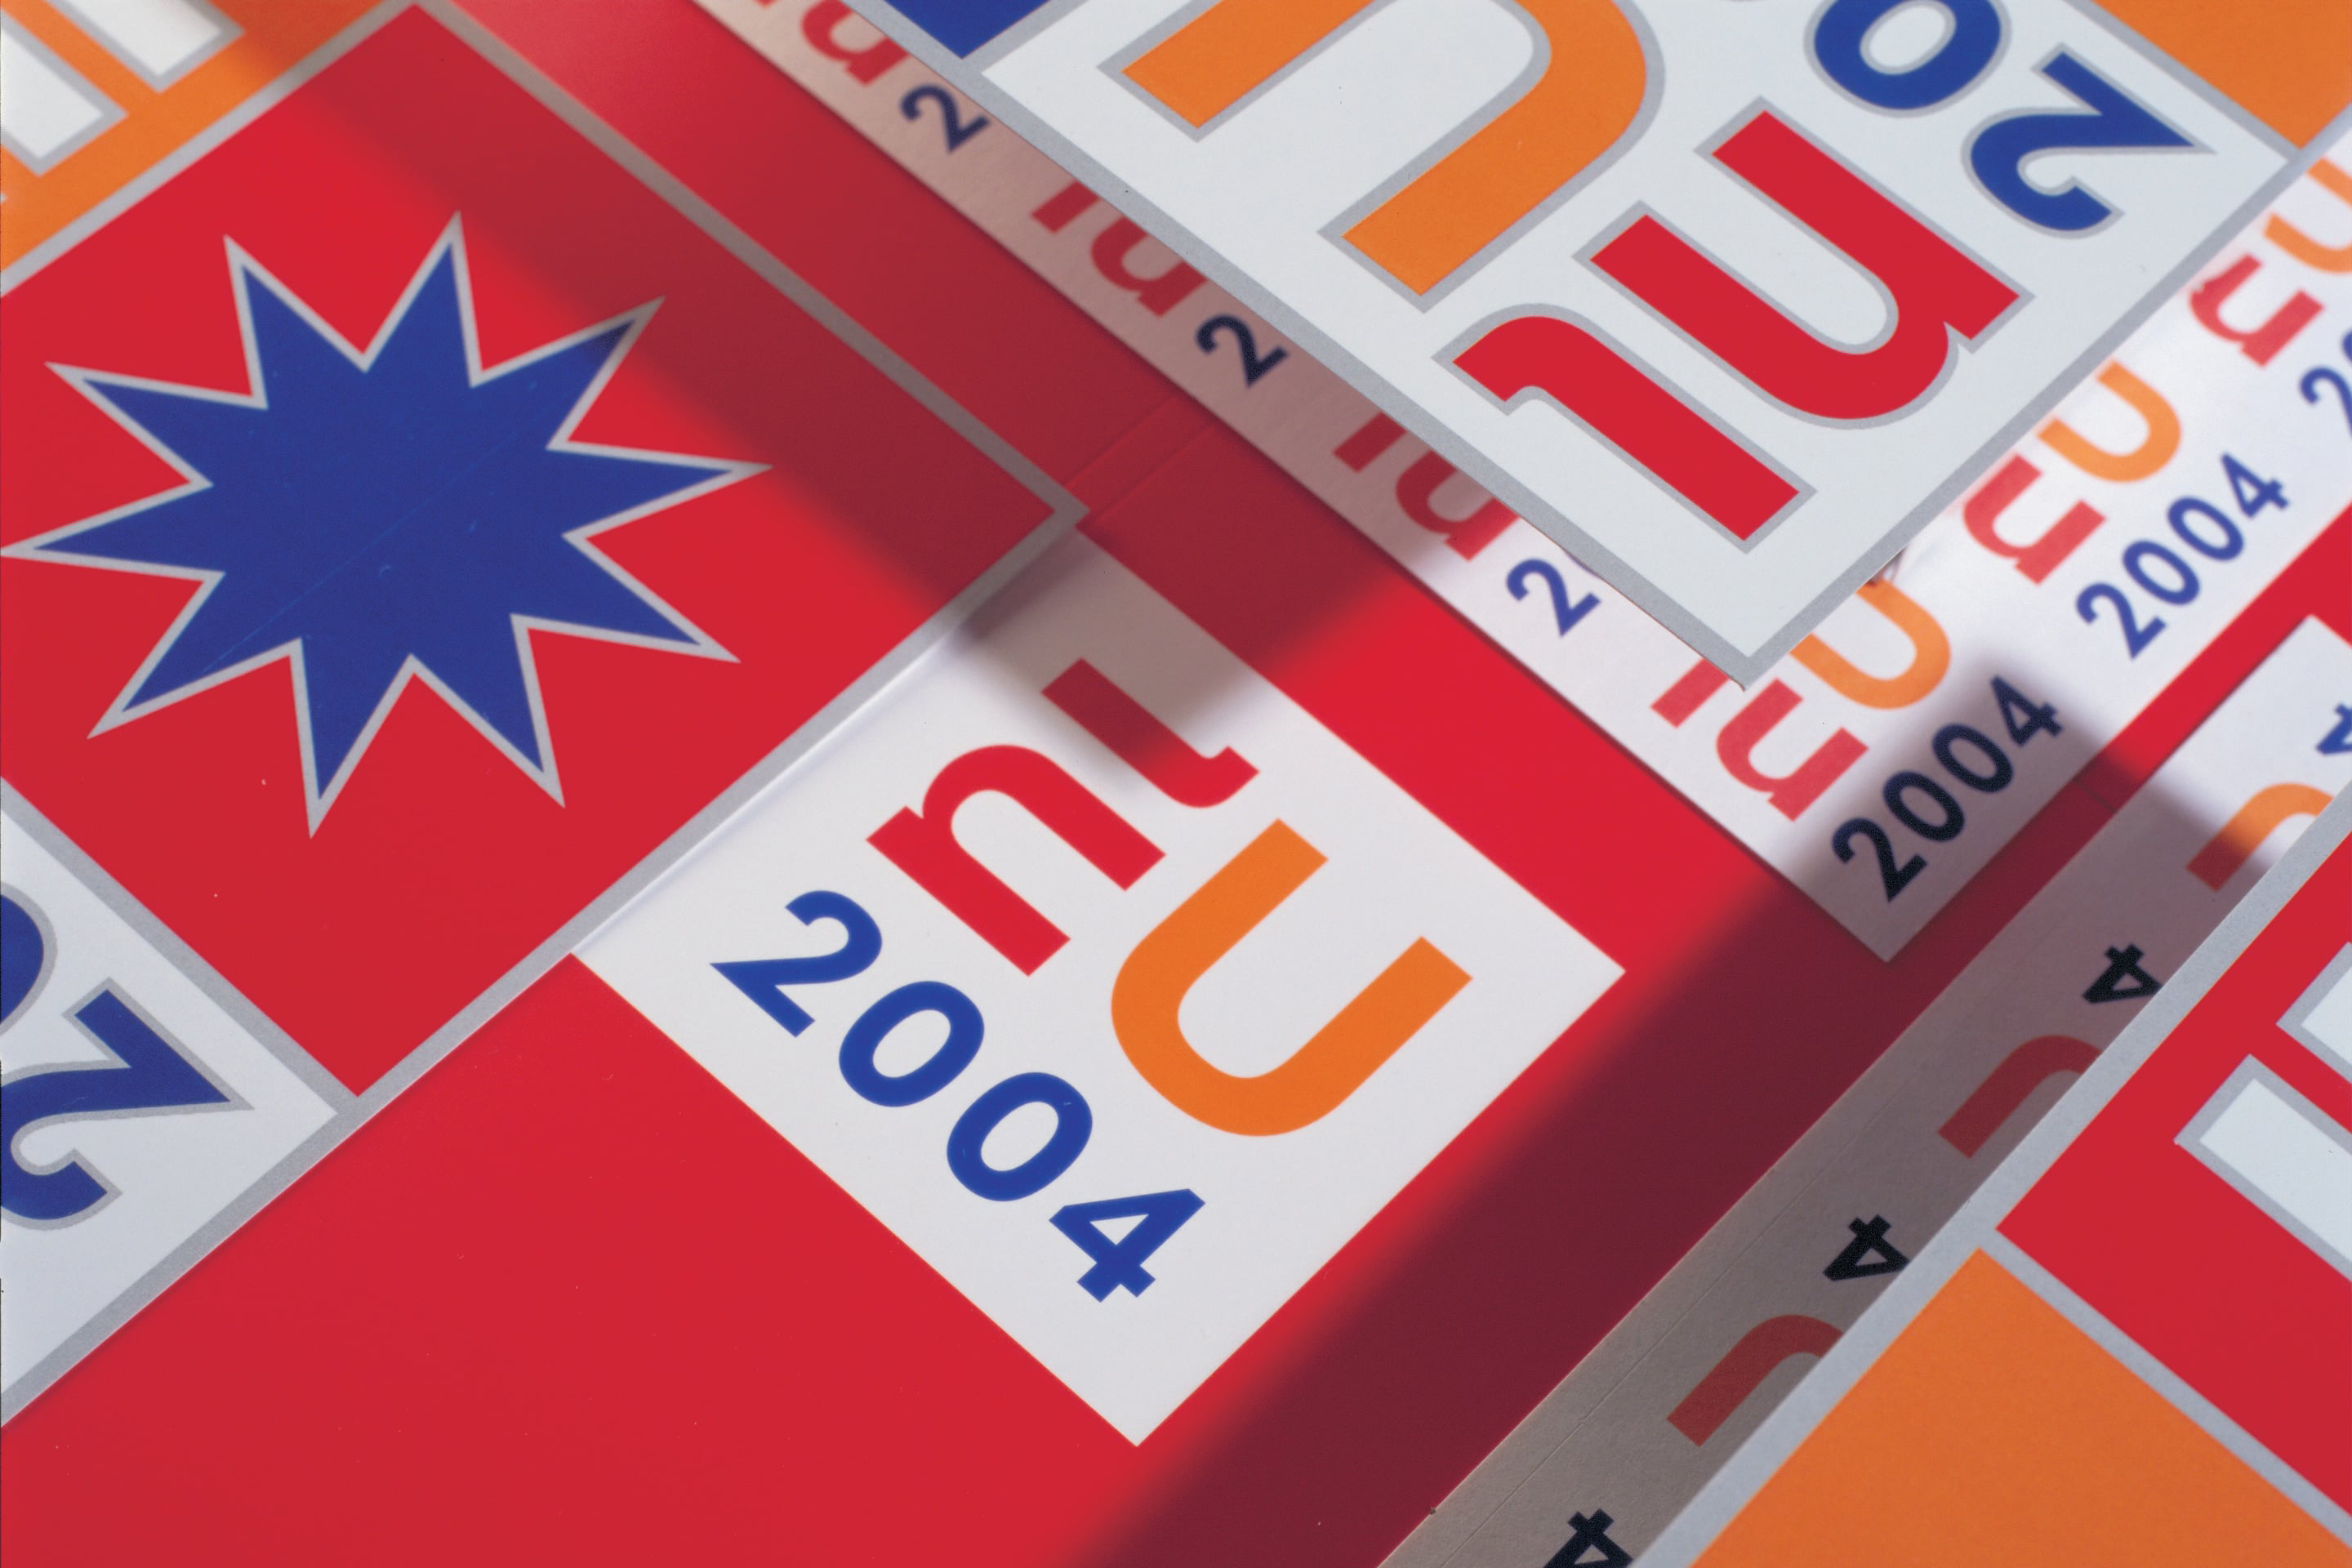 studio dumbar design visual brand identity for EUNL the European logo and event style for the Dutch Presidency of the European Union detail 2004